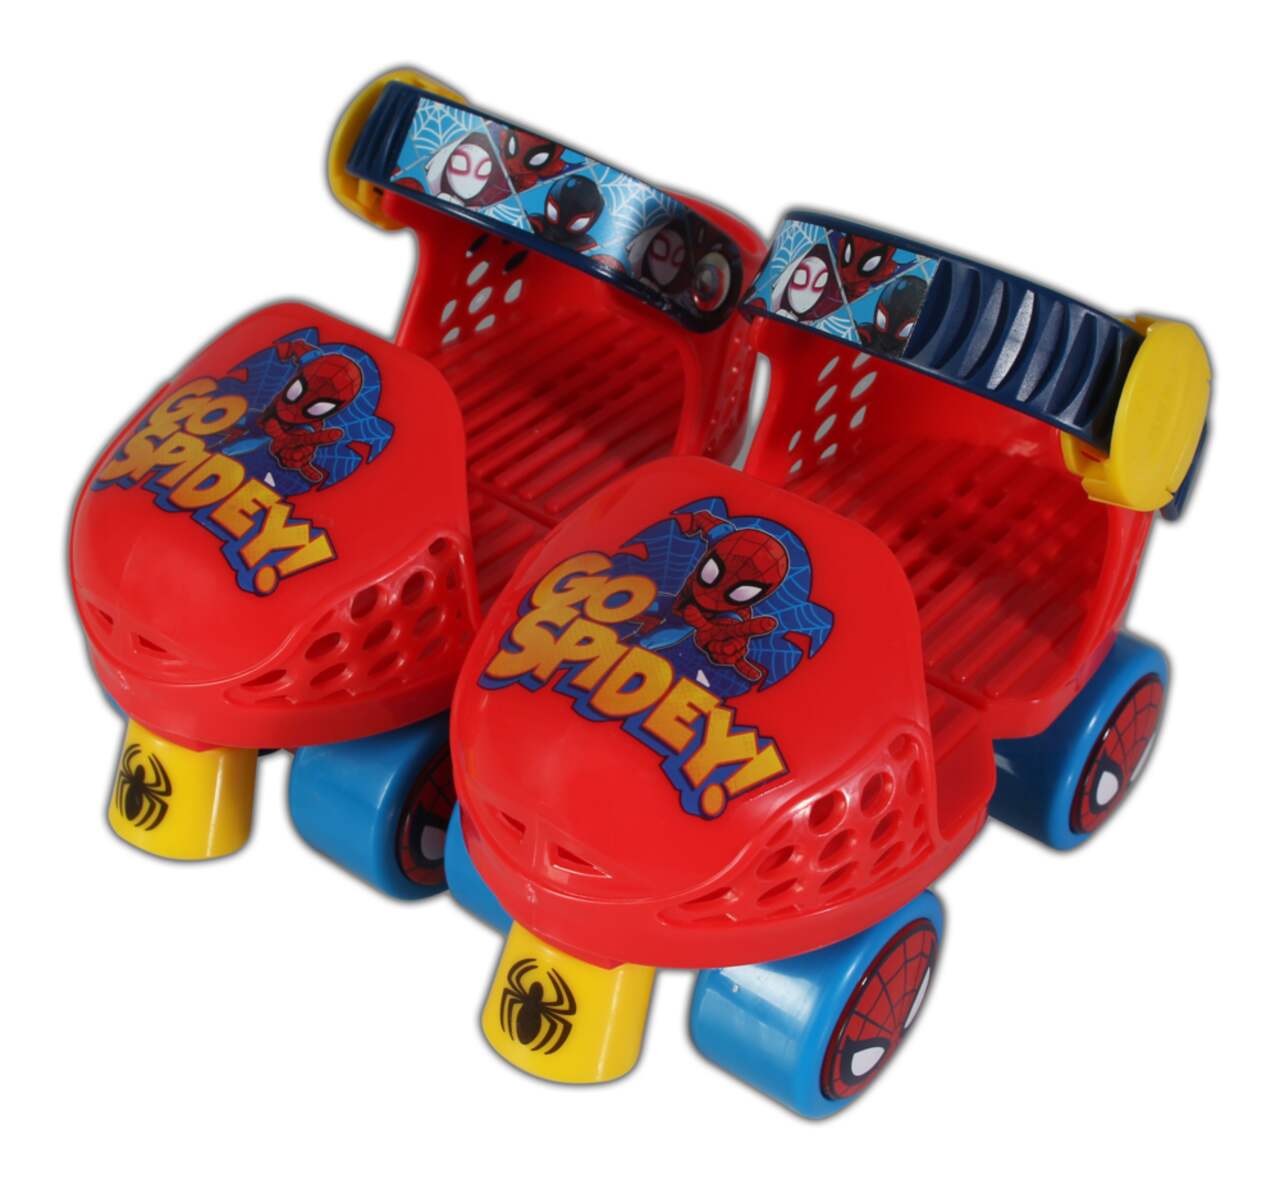 https://media-www.canadiantire.ca/product/playing/team-sports-and-golf/sports-equipment-accessories/0847957/spiderman-junior-skate-combo-84ee46fe-108d-48ef-a8de-d3ab28426dea.png?imdensity=1&imwidth=640&impolicy=mZoom